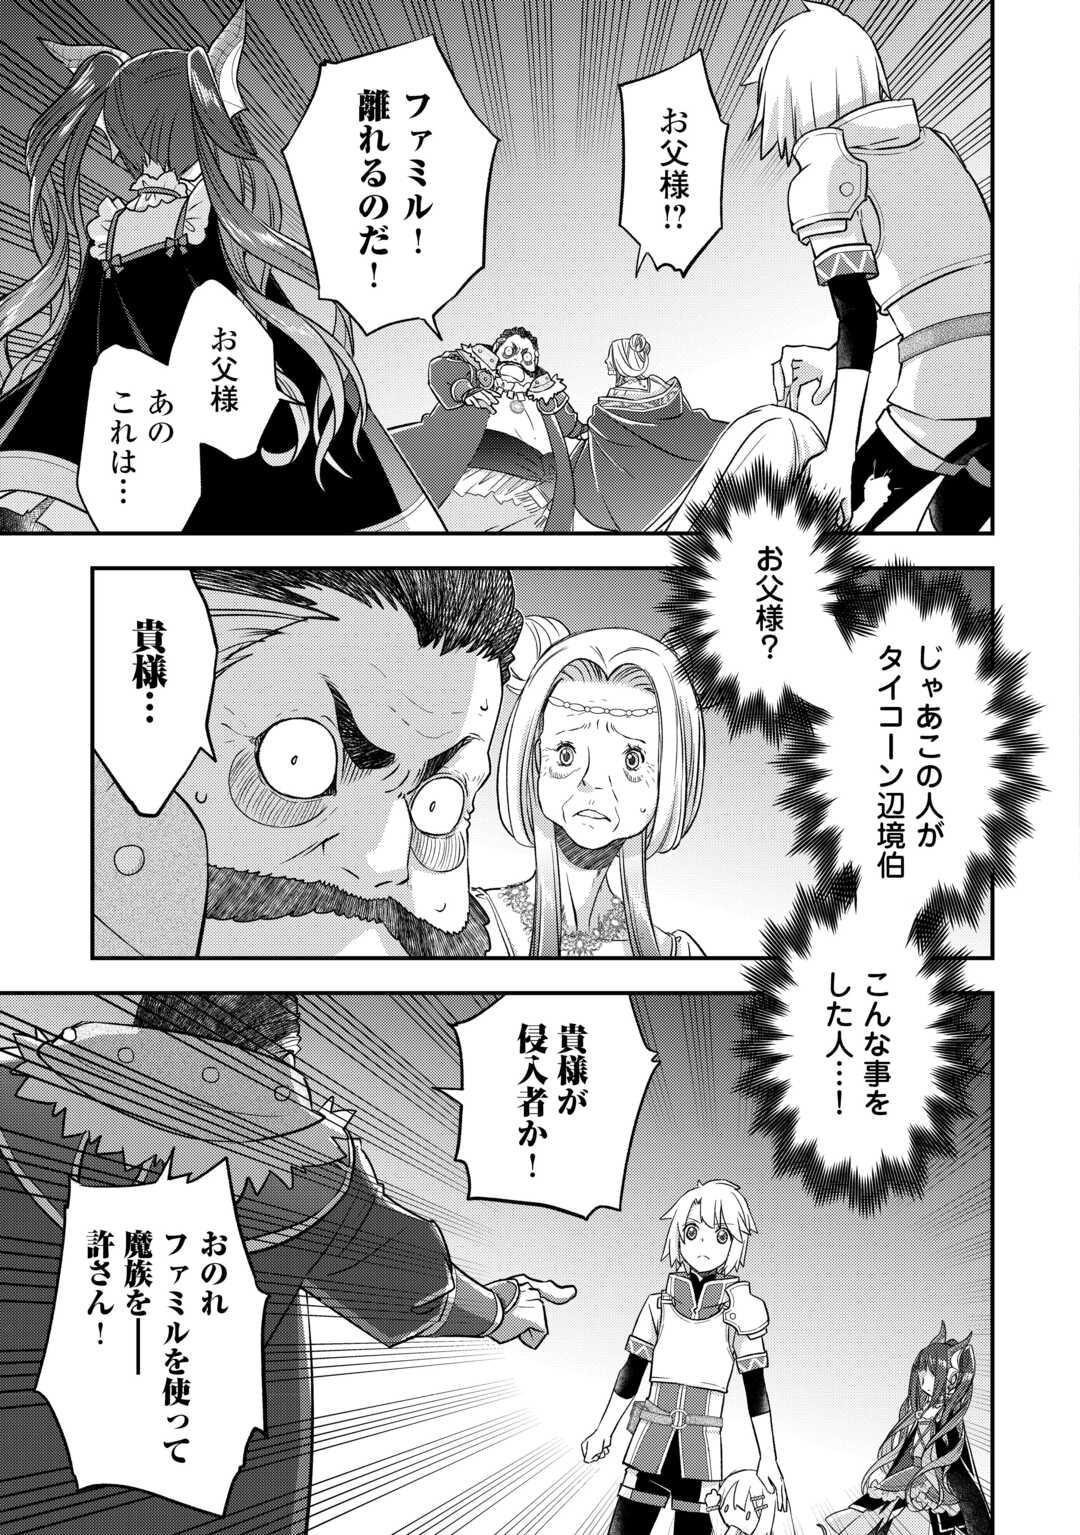 Kanchigai no Atelier Meister - Chapter 47 - Page 5